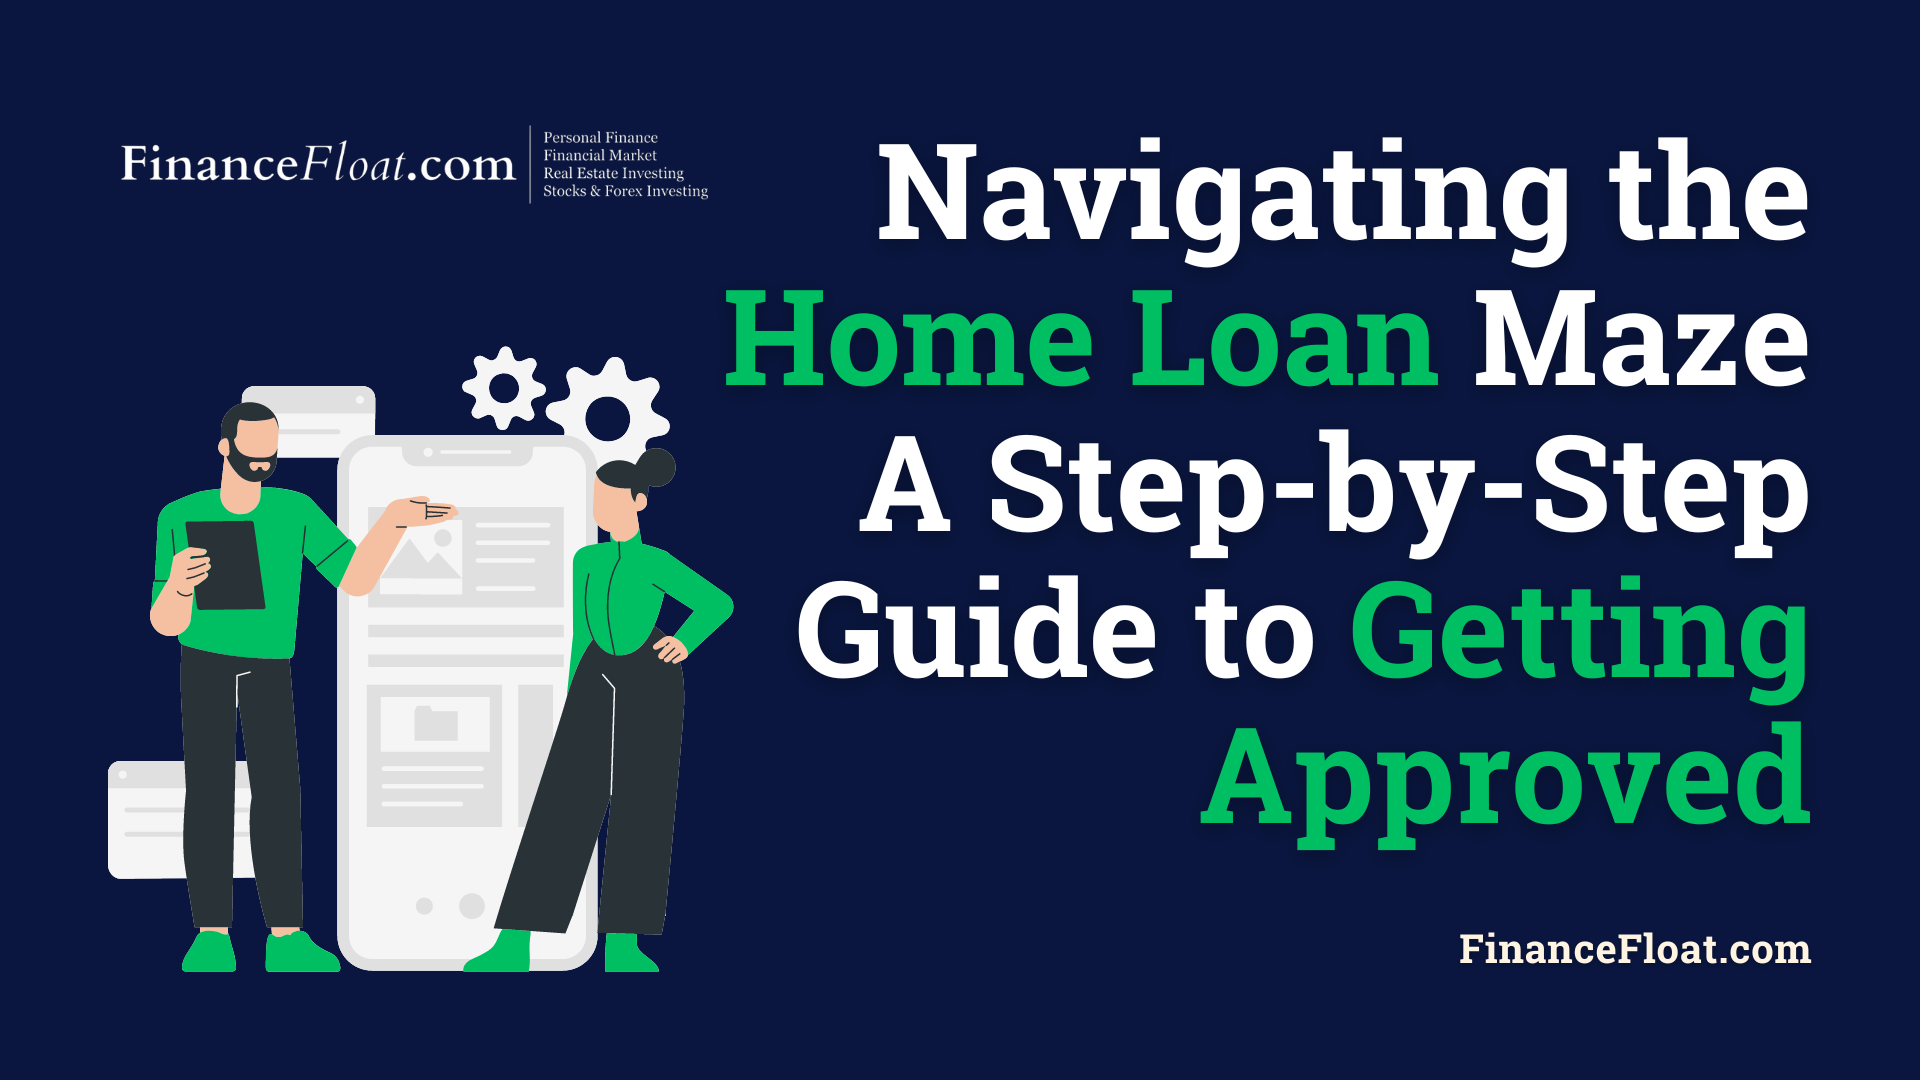 Navigating the Home Loan Maze A Step-by-Step Guide to Getting Approved